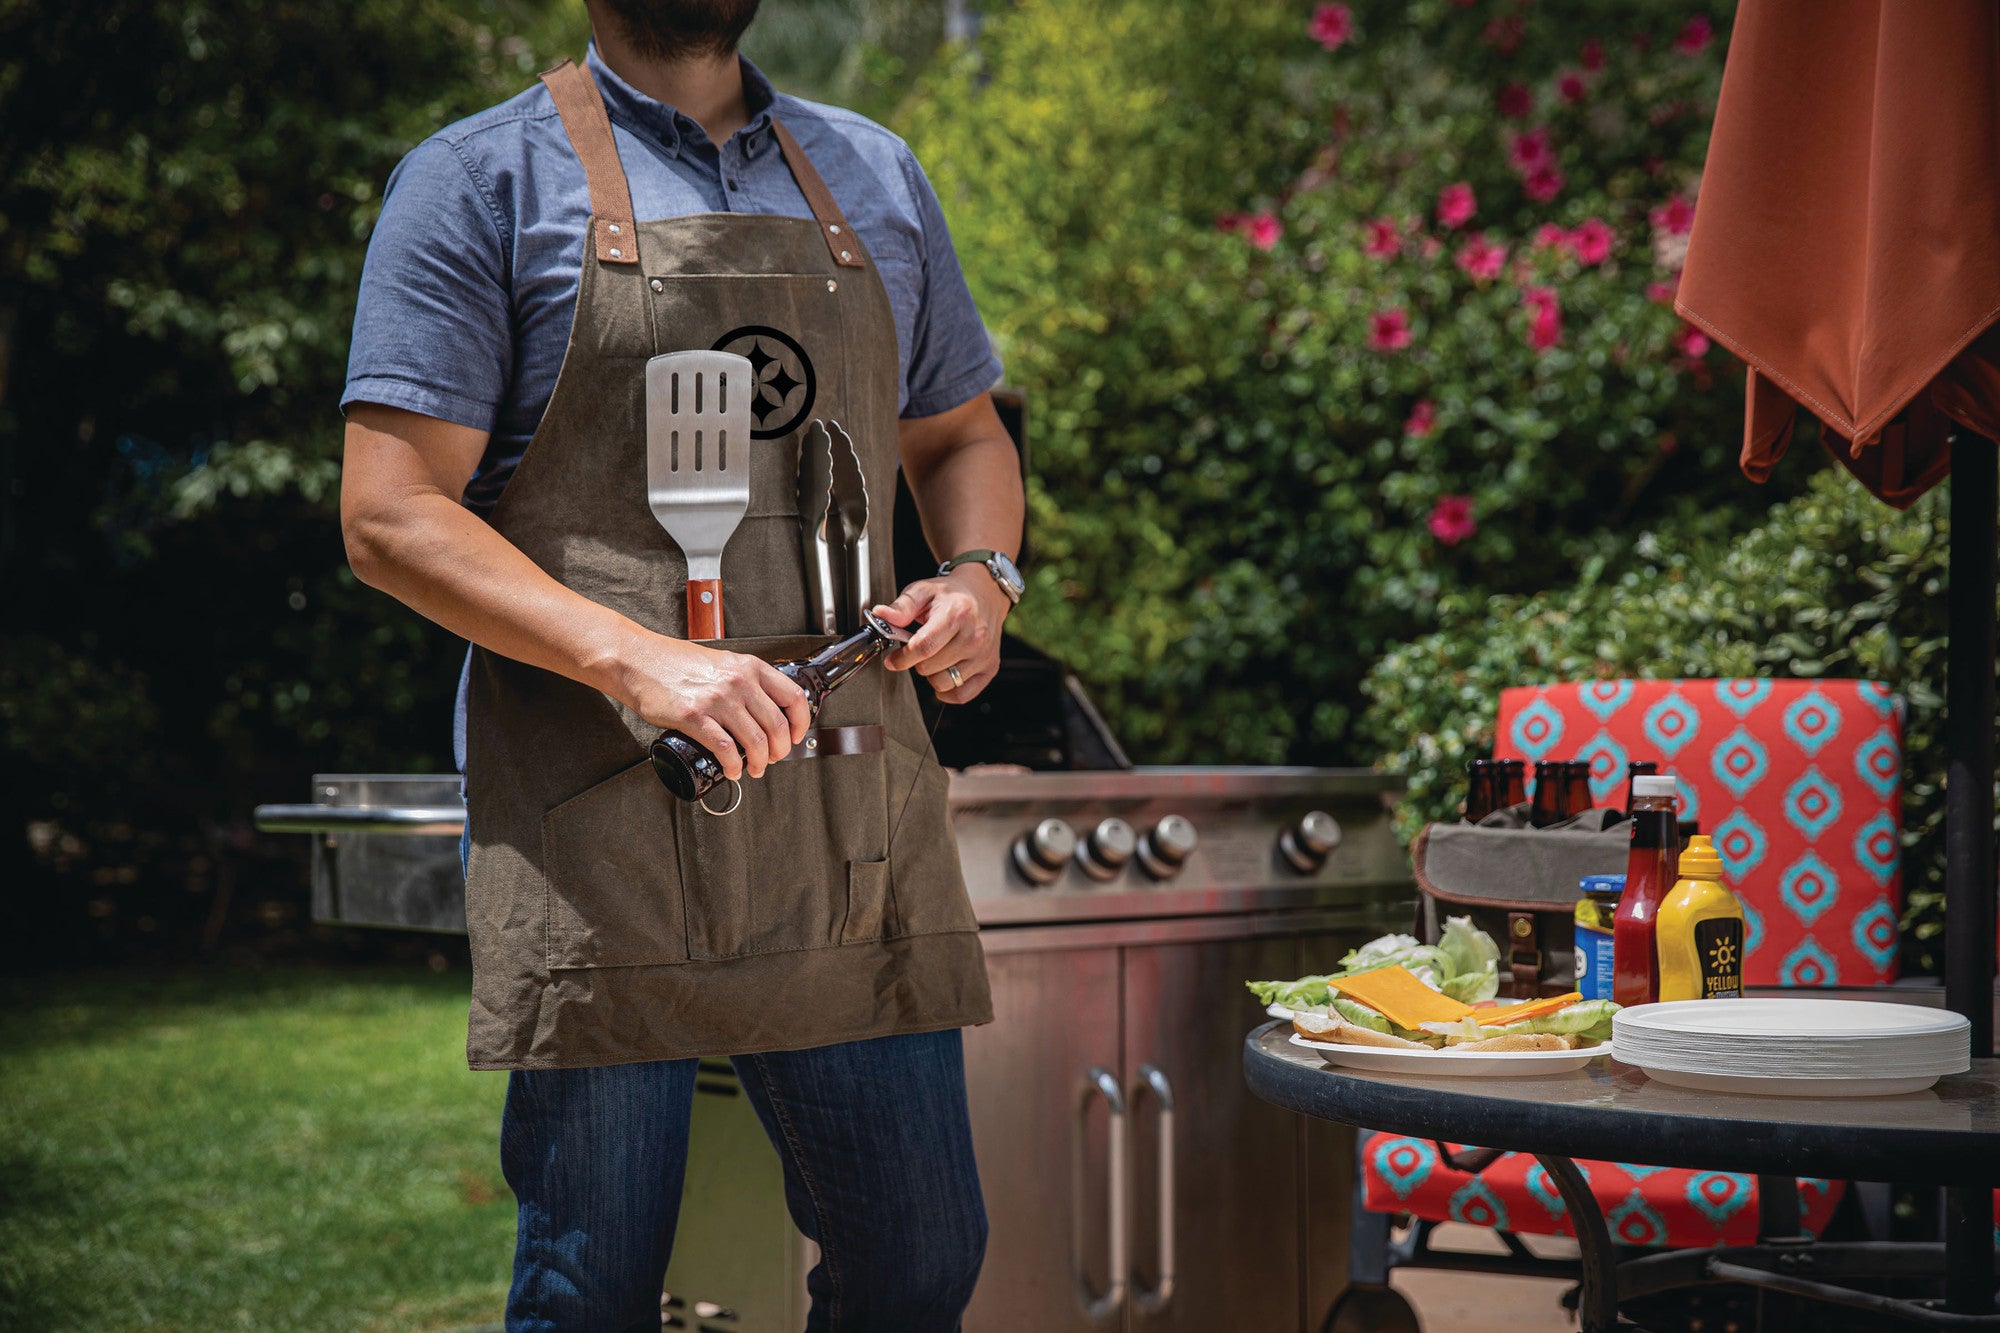 Pittsburgh Steelers - BBQ Apron with Tools & Bottle Opener